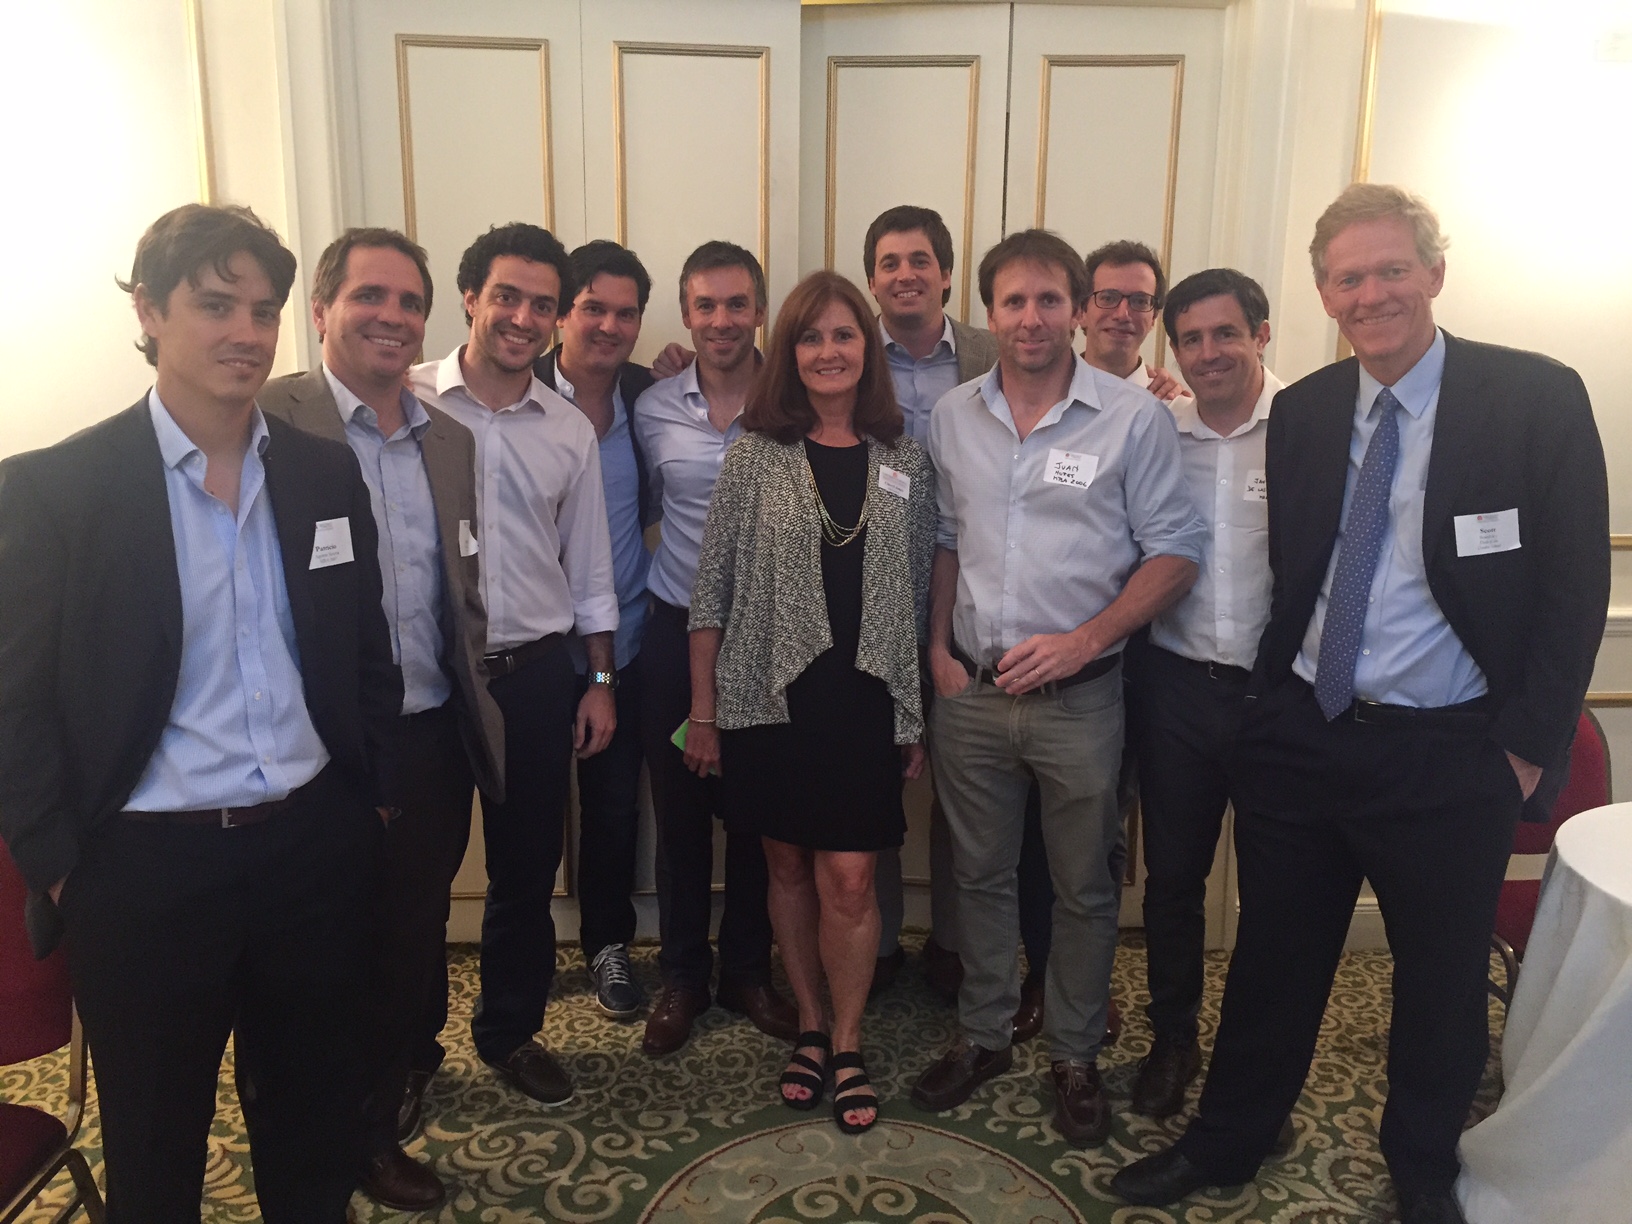 Dean Beardsley, Cheryl Jones, Associate Director of Admissions, and Darden alumni in Buenos Aires at the 14 November Admissions and Alumni Reception